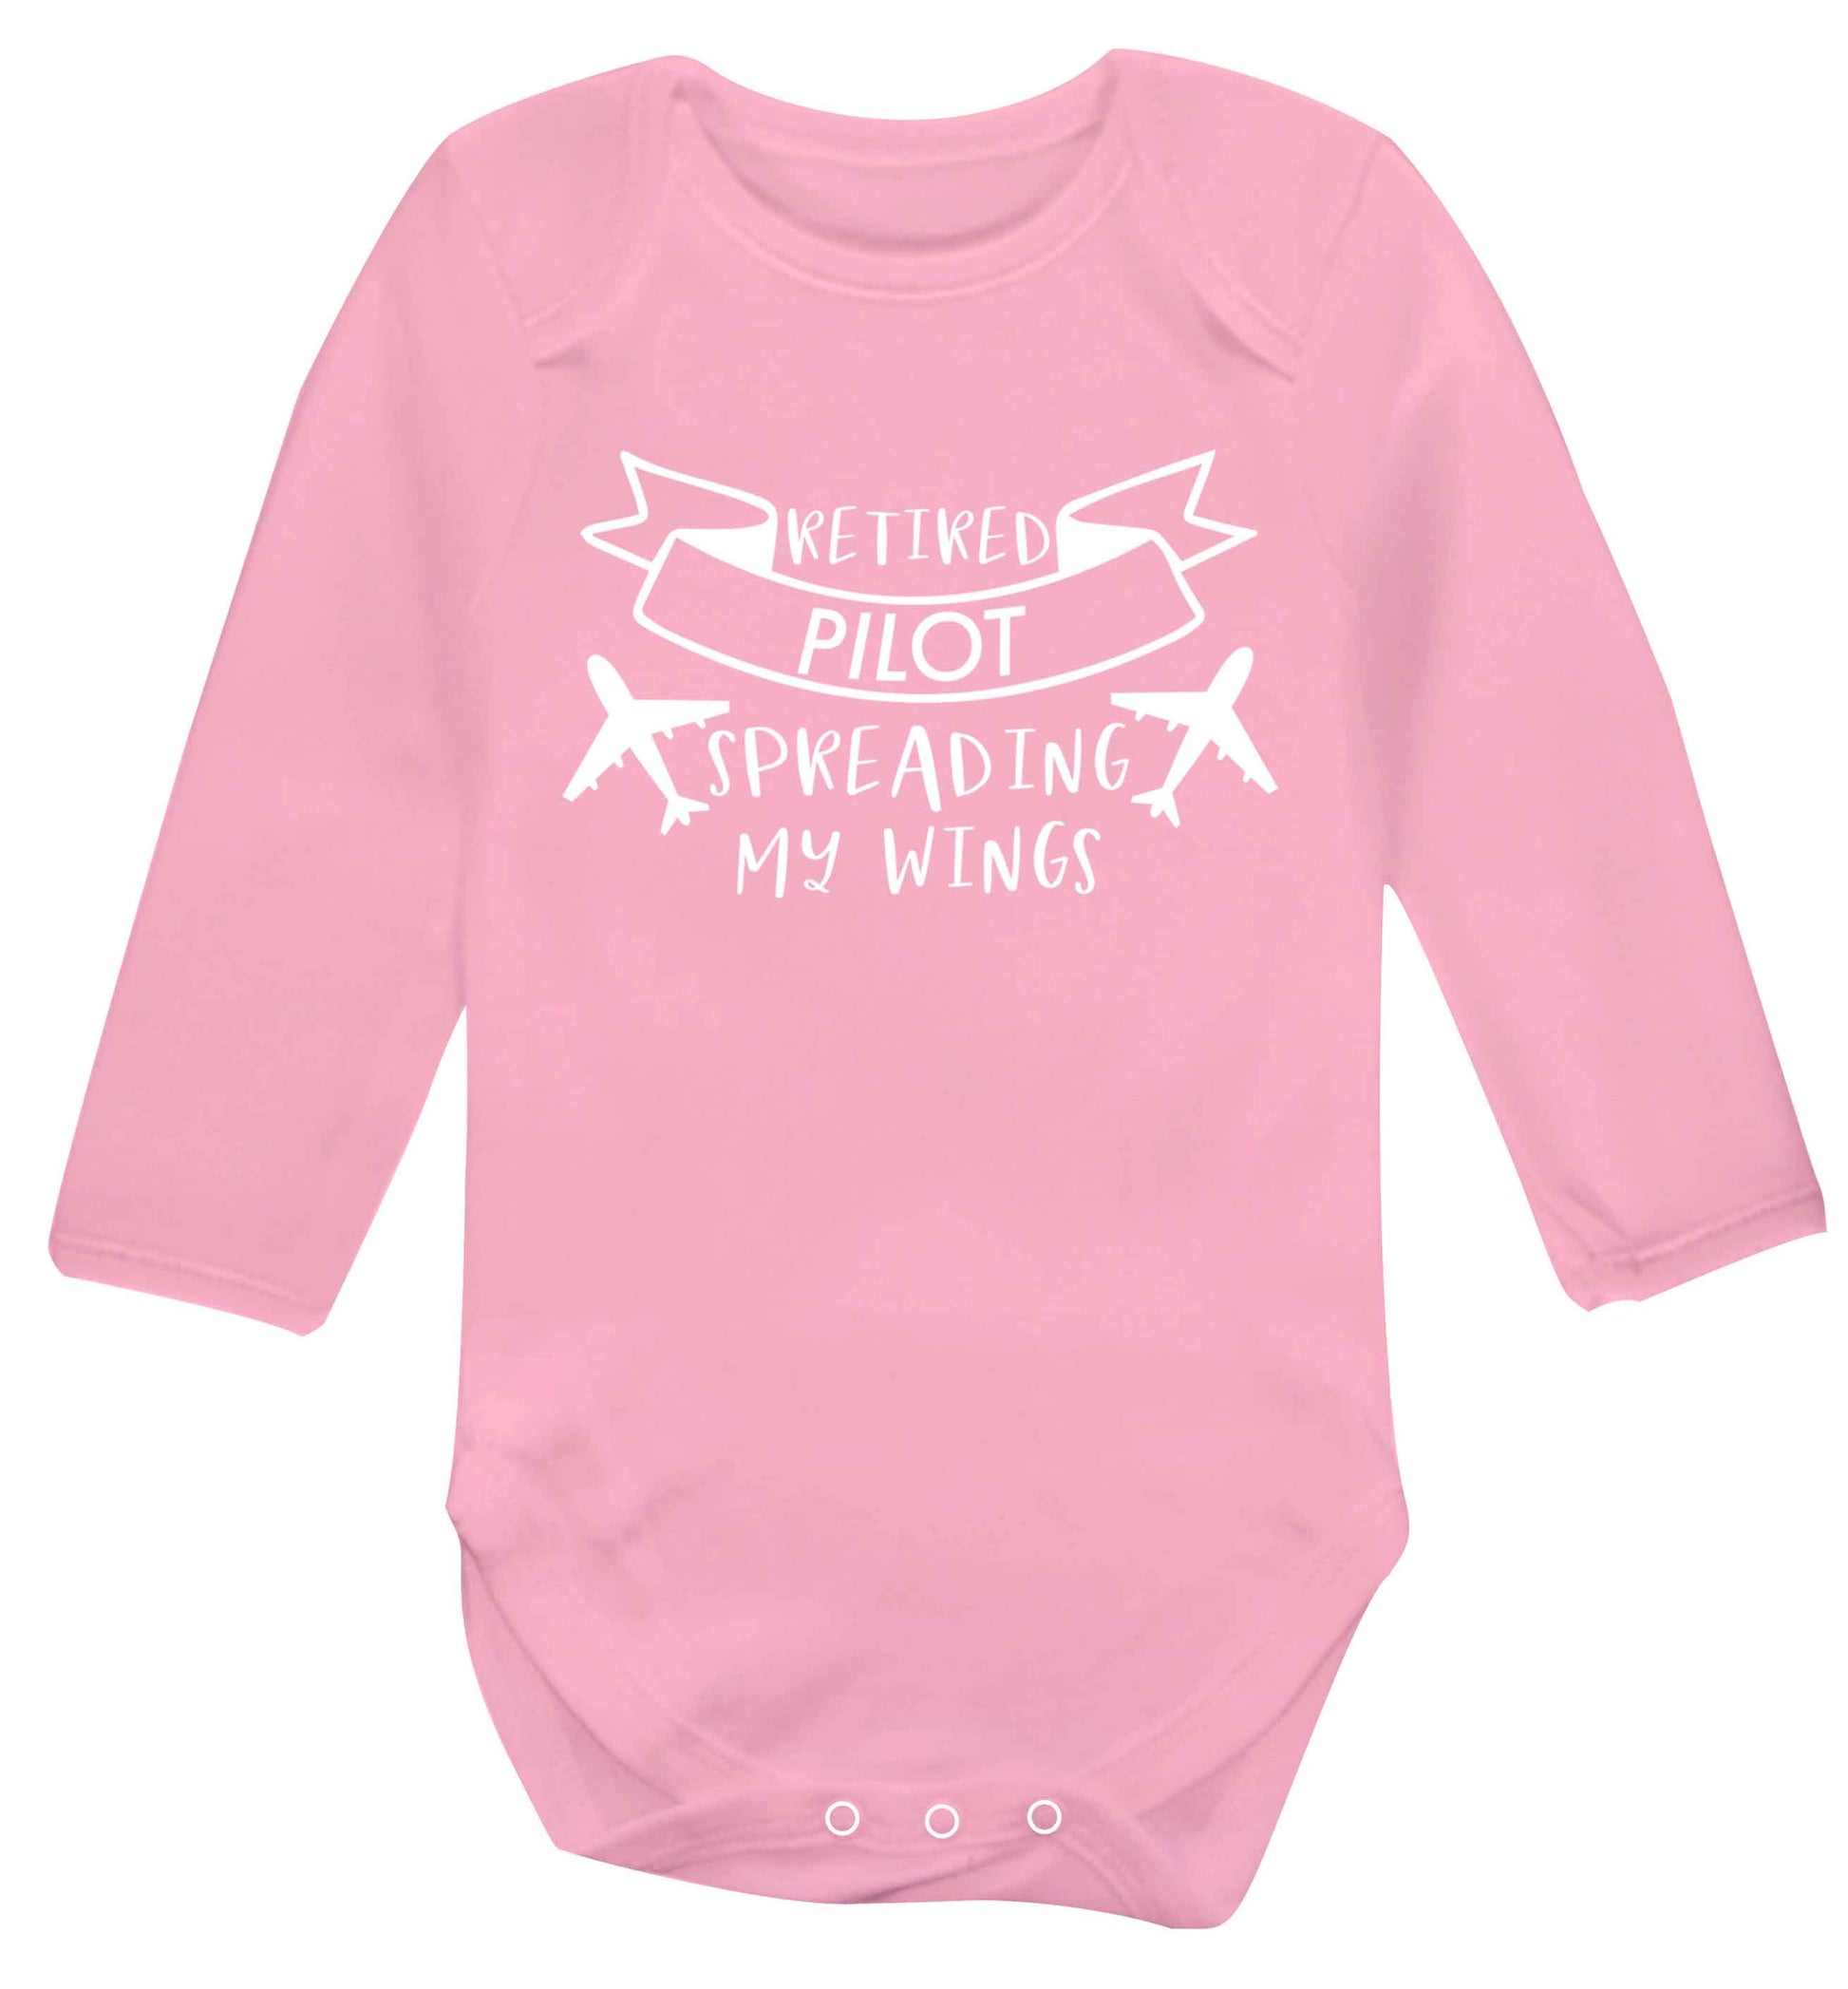 Retired pilot spreading my wings Baby Vest long sleeved pale pink 6-12 months